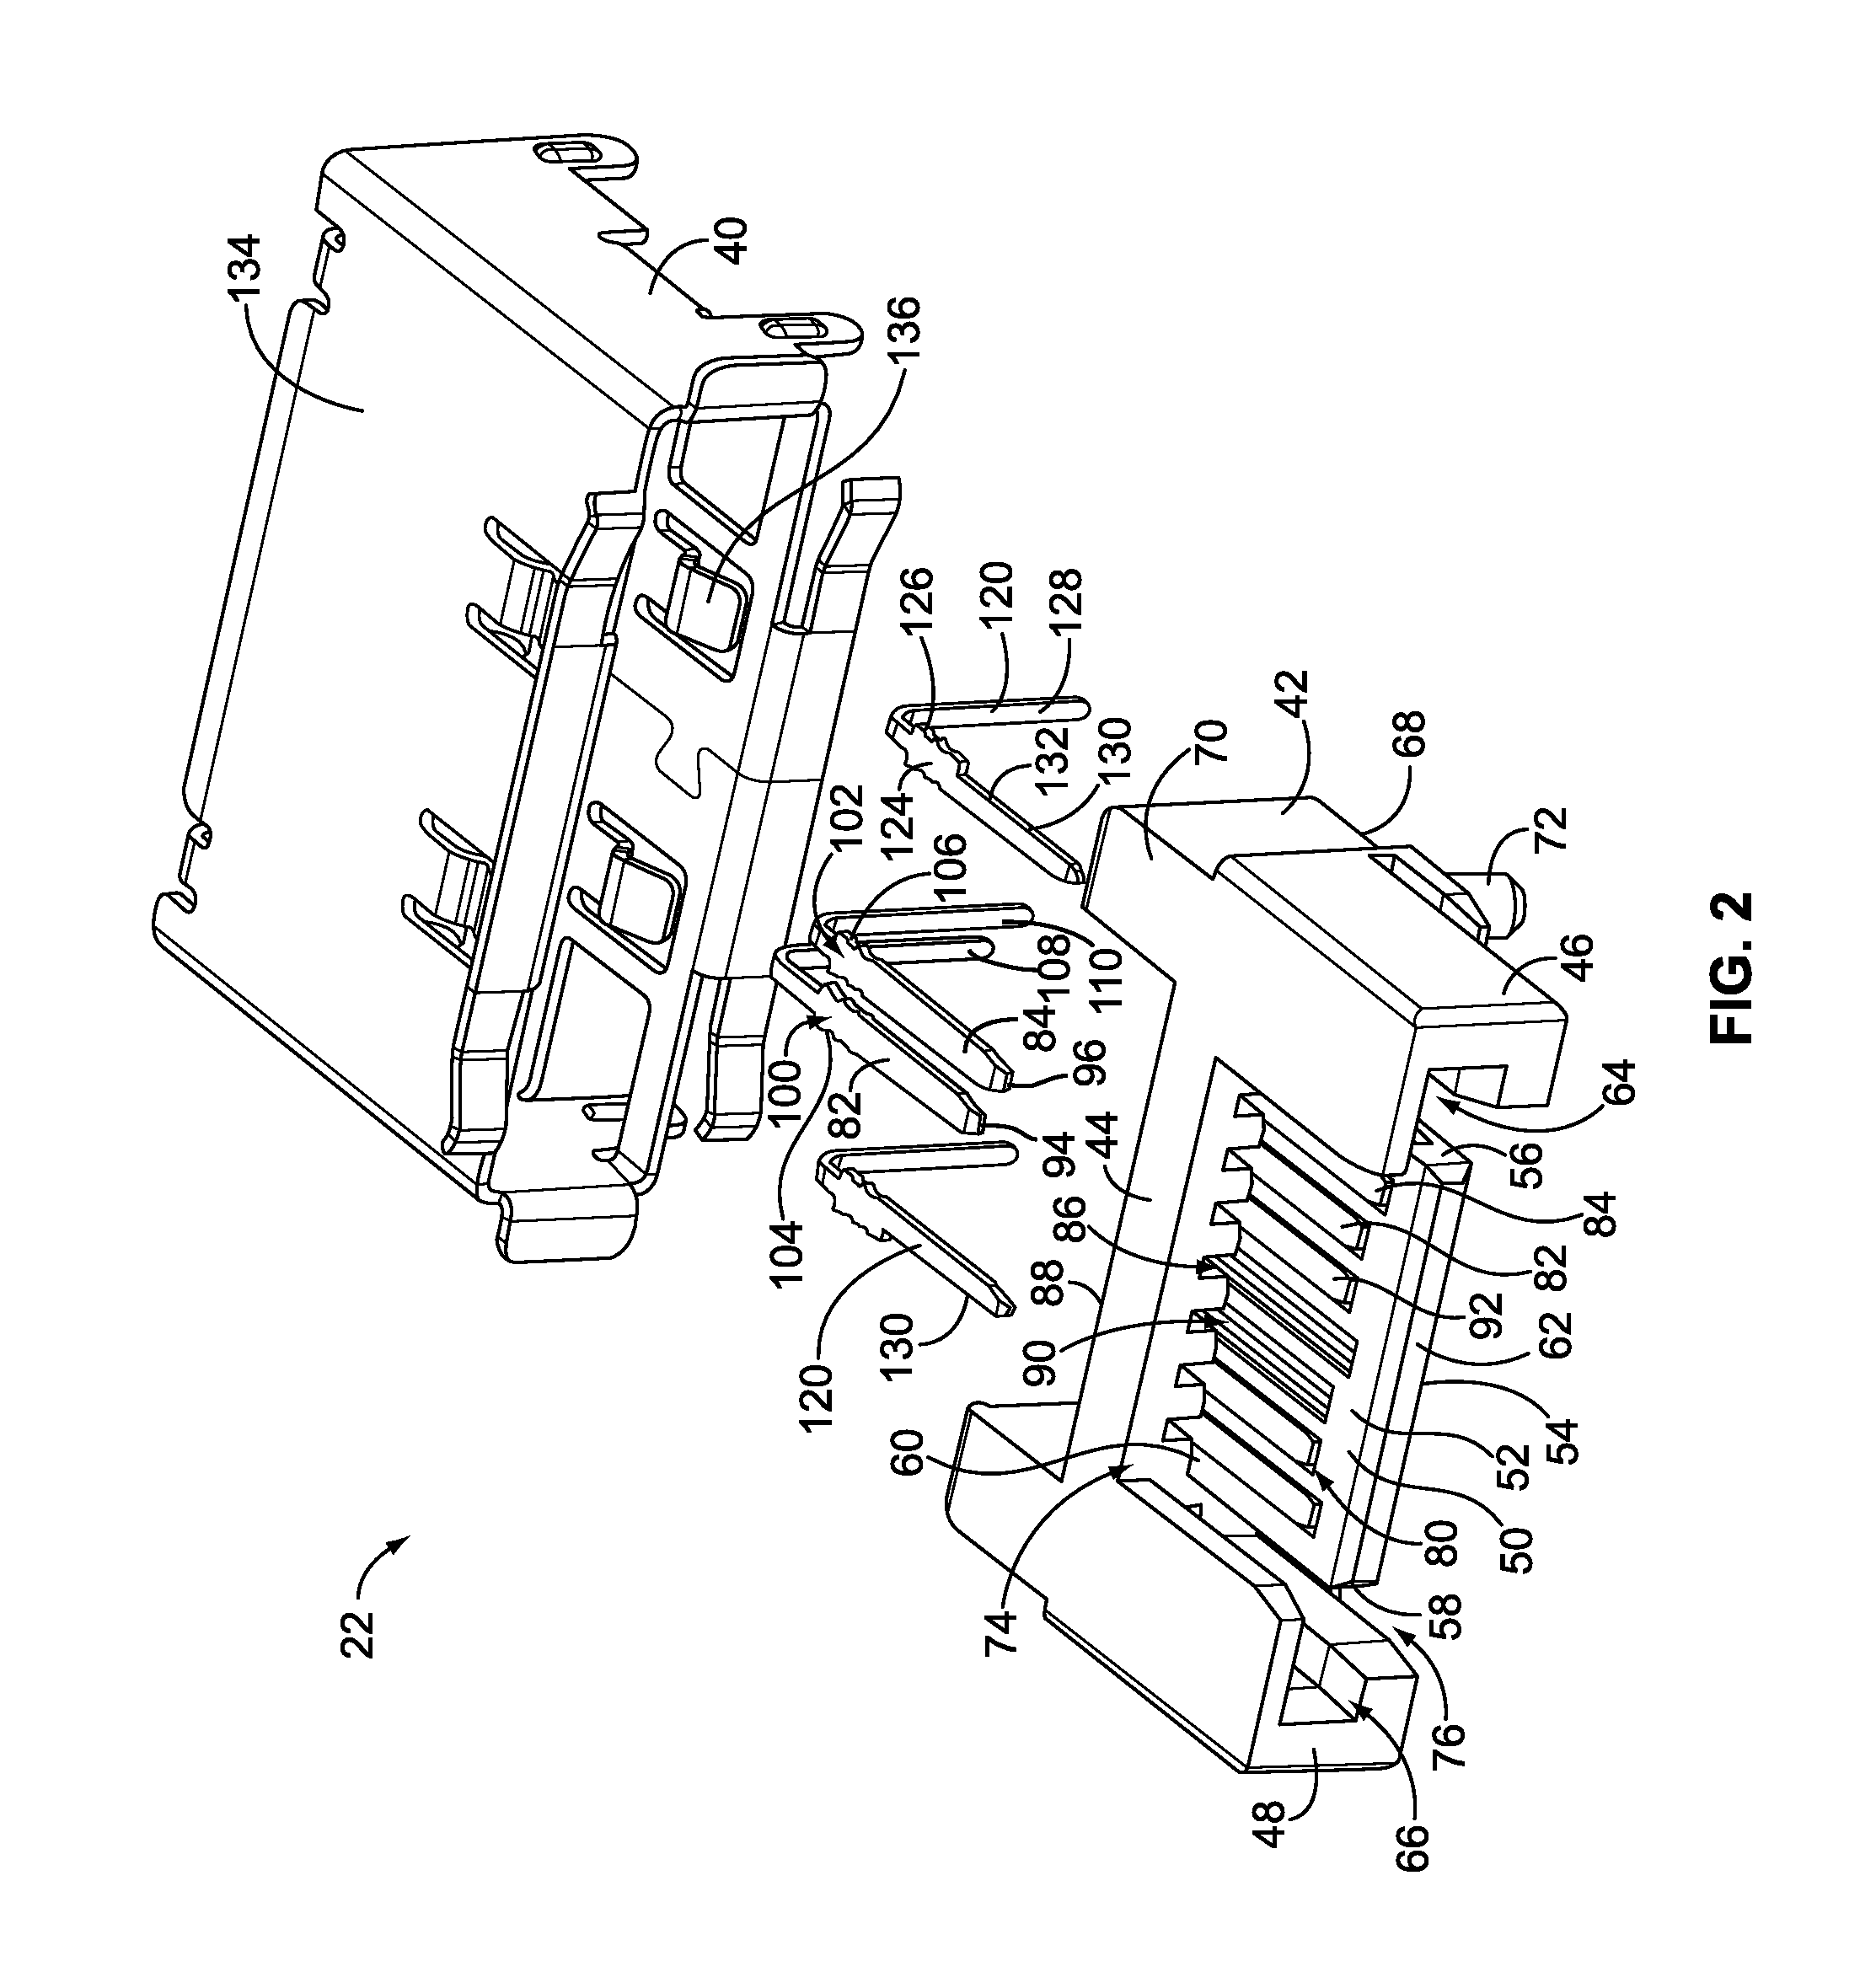 Electrical connector having signal and power contacts